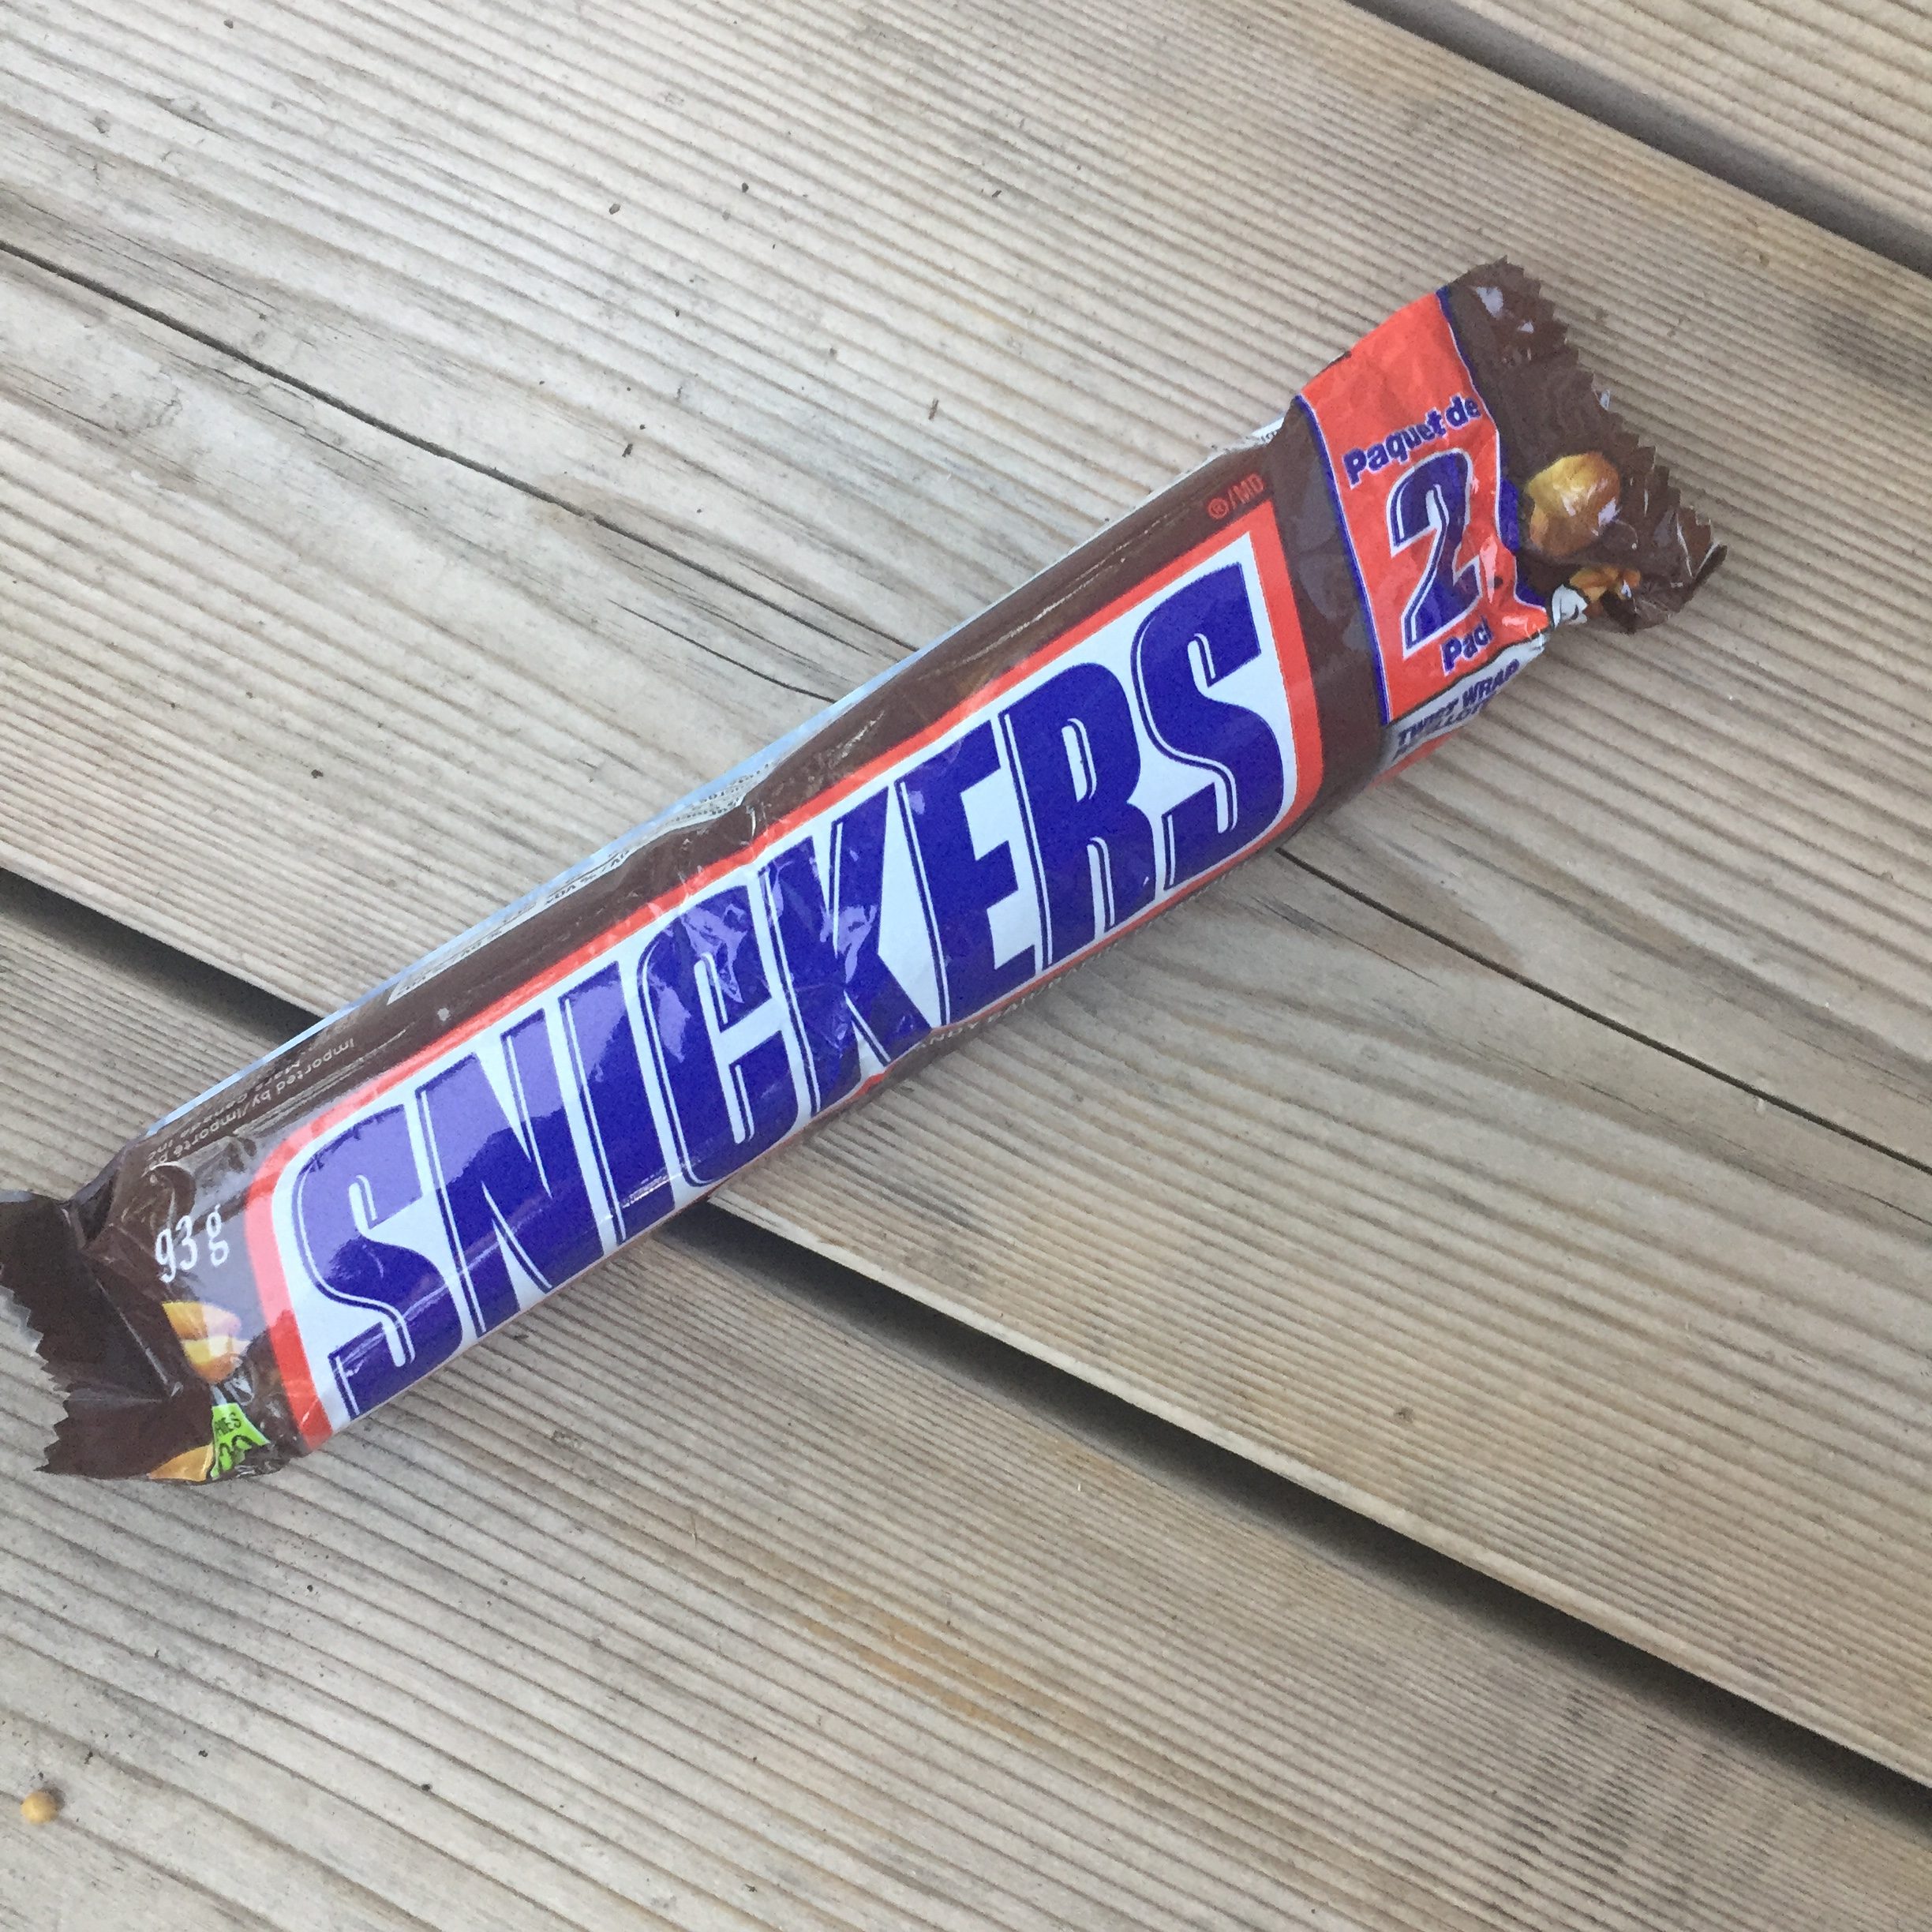 Snickers is Huband's favorte...and I didn't know. It reminded me about being deligent about the love map I have for Husband. Snickers bar on wood background